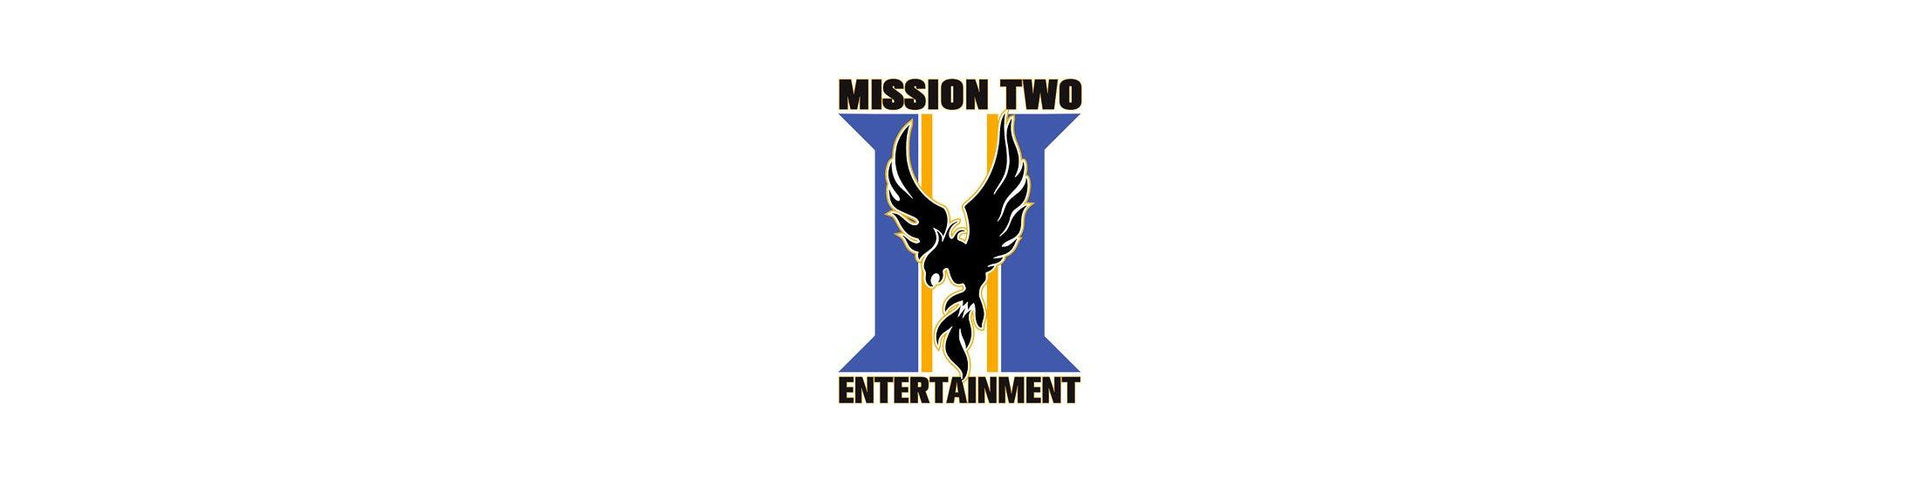 Shop – Mission Two Entertainment – Band & Music Merch – Cold Cuts Merch